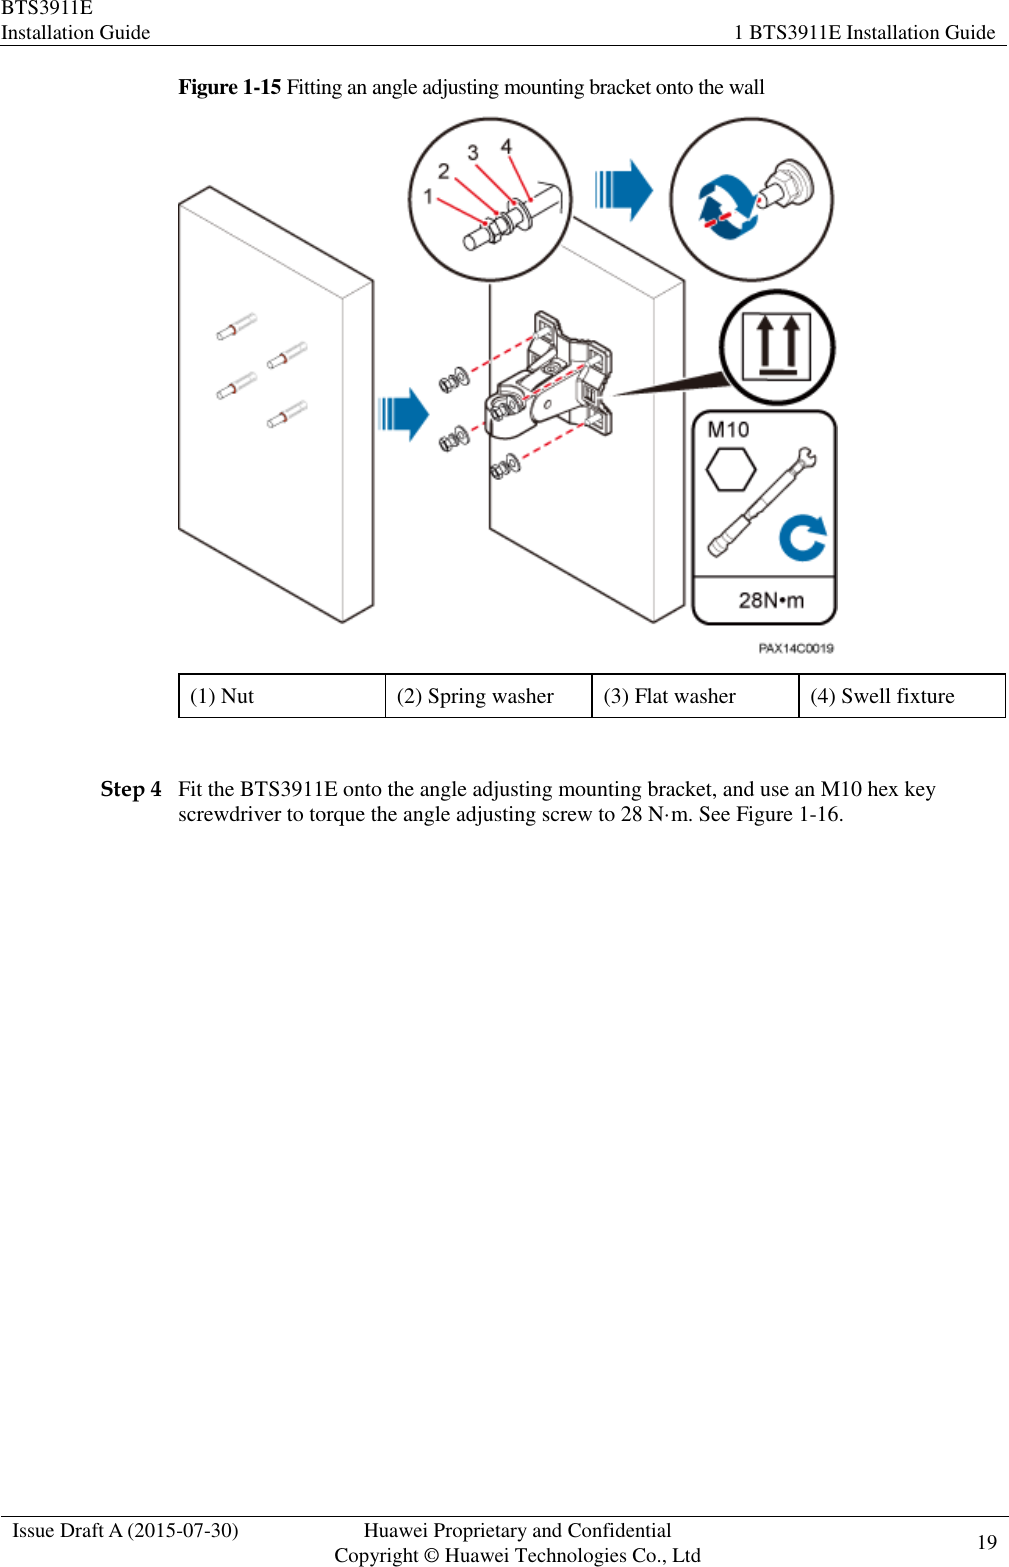 BTS3911E Installation Guide 1 BTS3911E Installation Guide  Issue Draft A (2015-07-30) Huawei Proprietary and Confidential           Copyright © Huawei Technologies Co., Ltd 19    Figure 1-15 Fitting an angle adjusting mounting bracket onto the wall  (1) Nut (2) Spring washer (3) Flat washer (4) Swell fixture  Step 4 Fit the BTS3911E onto the angle adjusting mounting bracket, and use an M10 hex key screwdriver to torque the angle adjusting screw to 28 N·m. See Figure 1-16. 